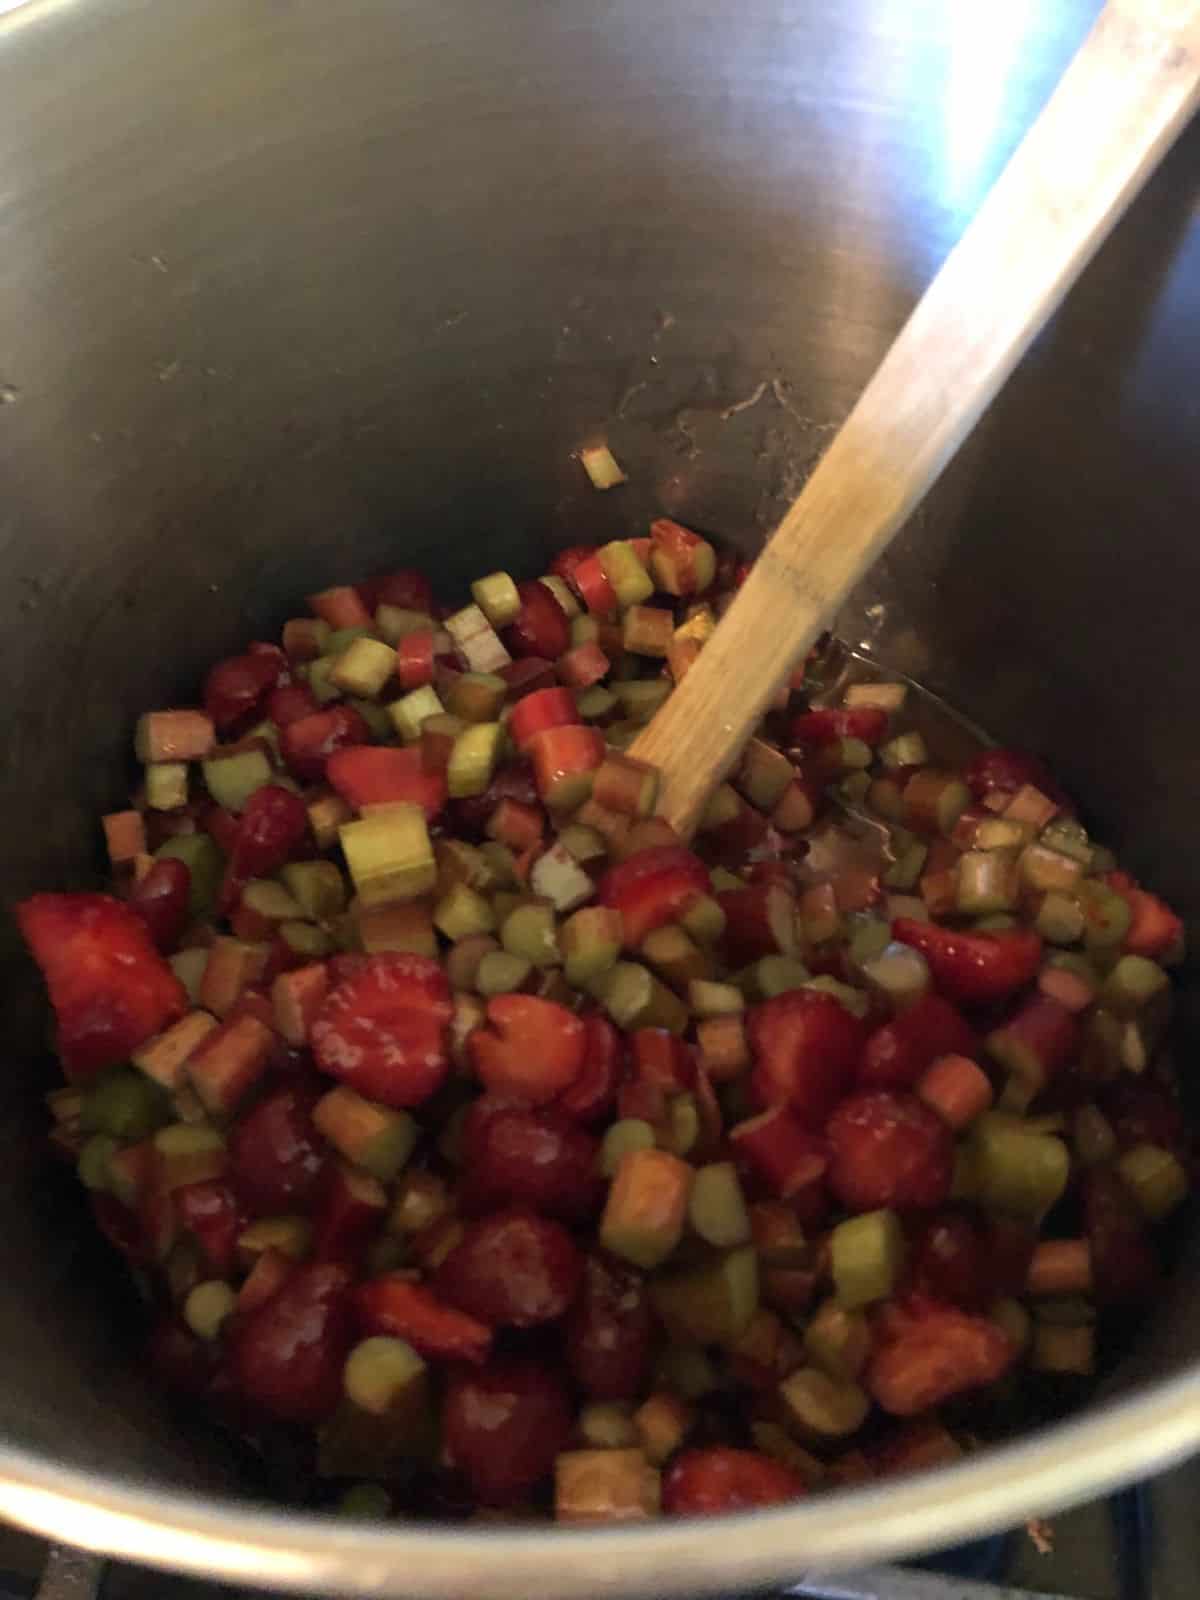 Strawberry and rhubarb being cooked for fruit leather puree